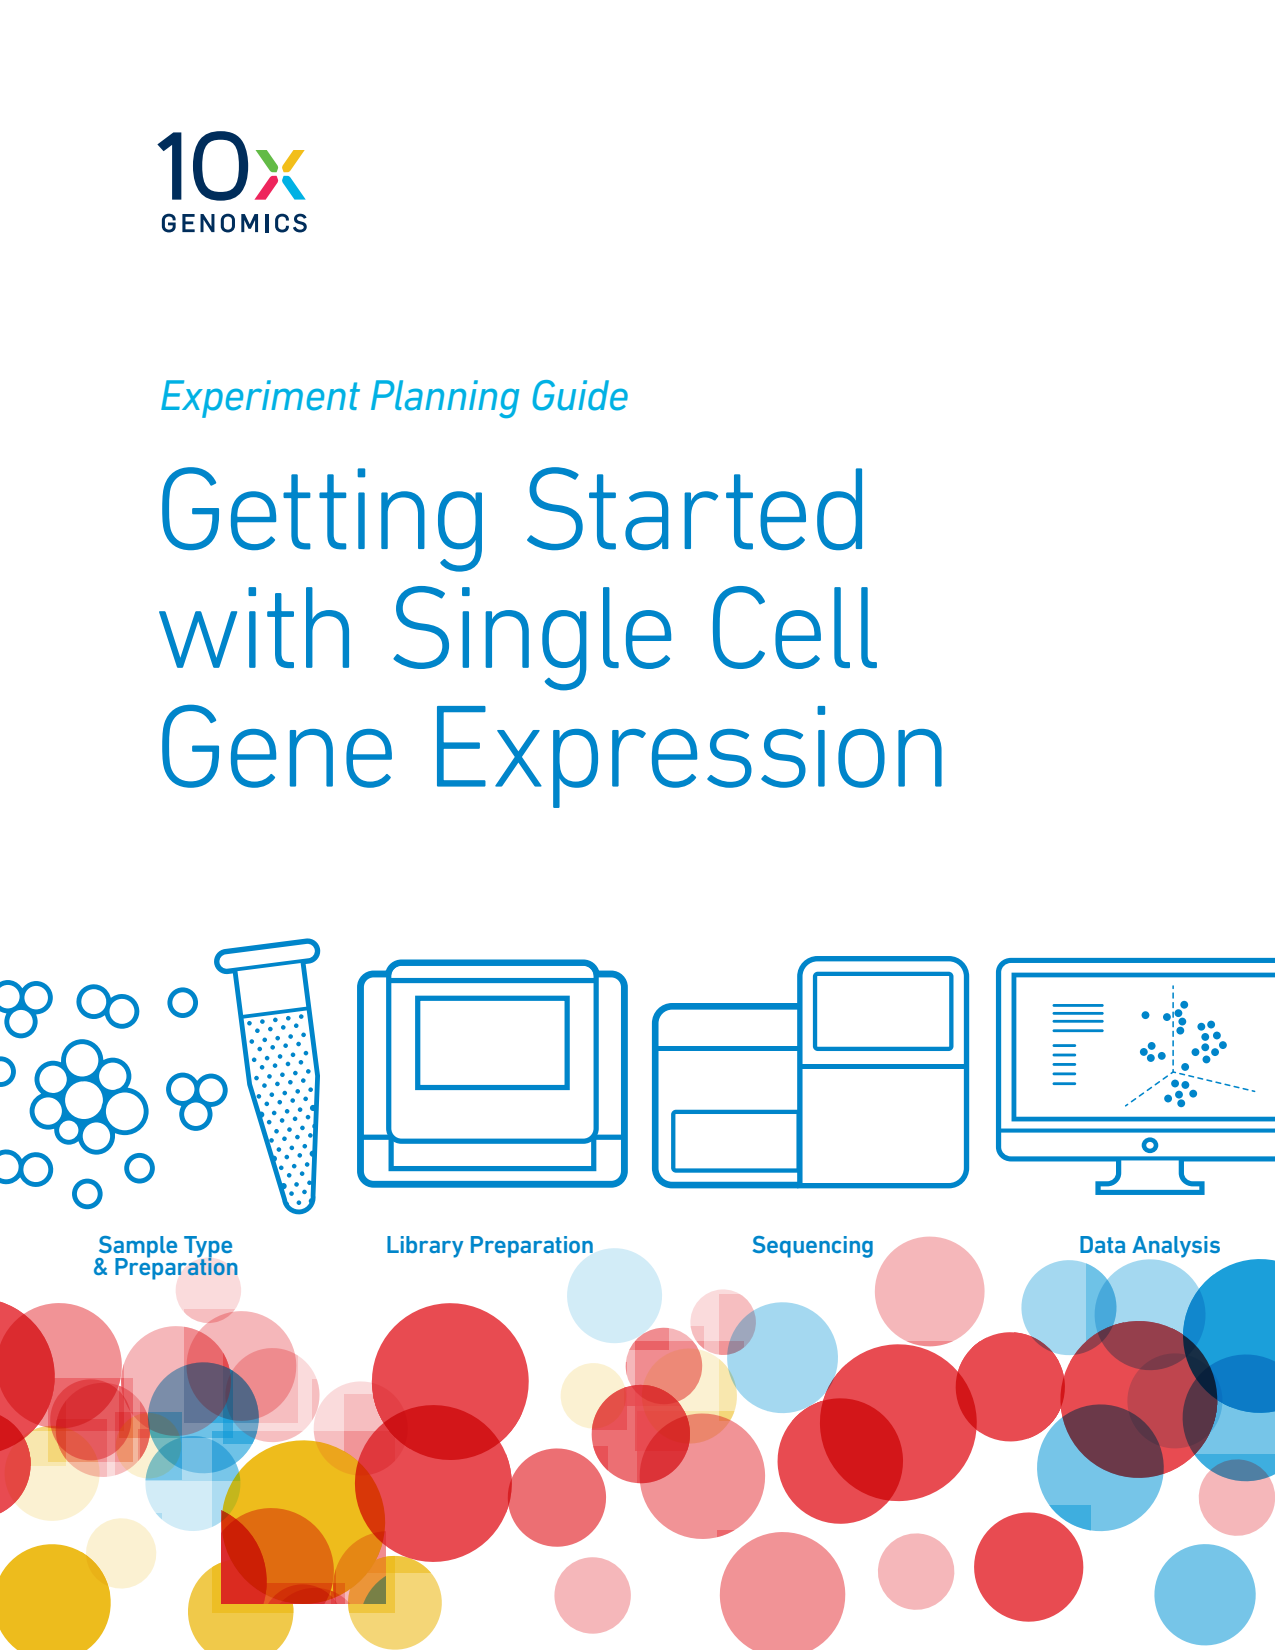 Getting Started with Single Cell Gene Expression